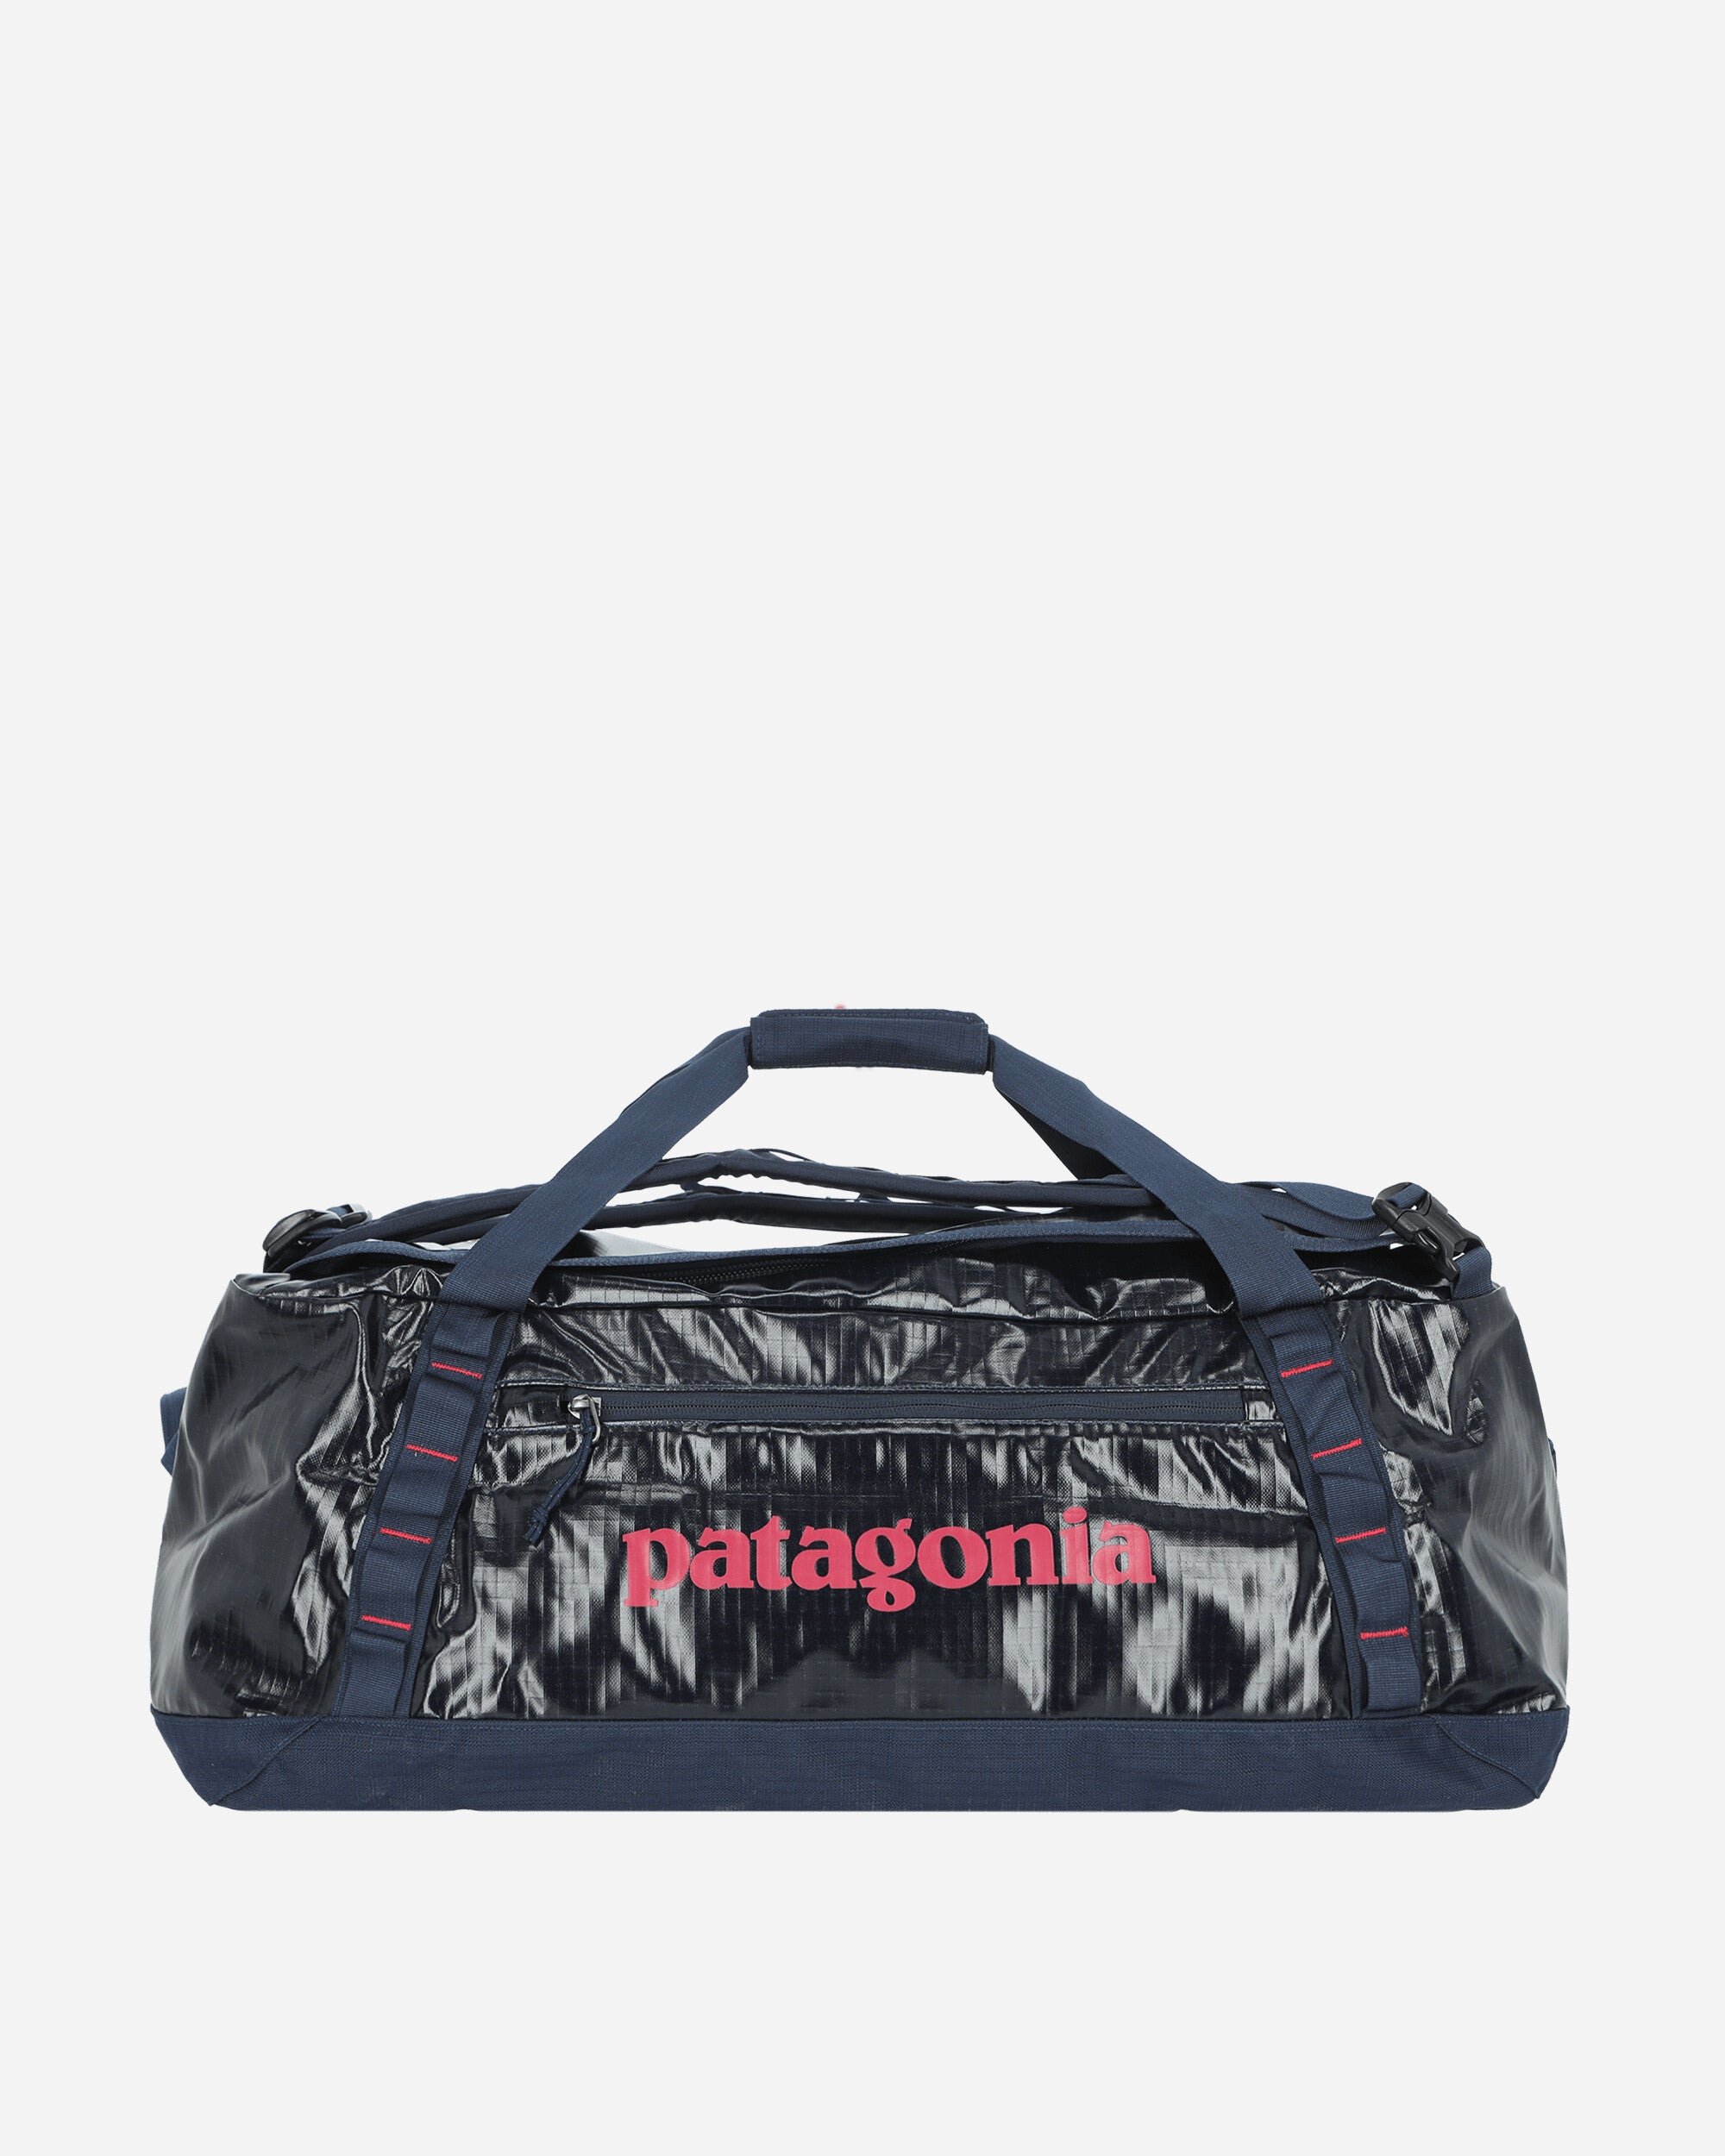 Patagonia Black Hole Bag Classic Navy - Slam Jam Official Store